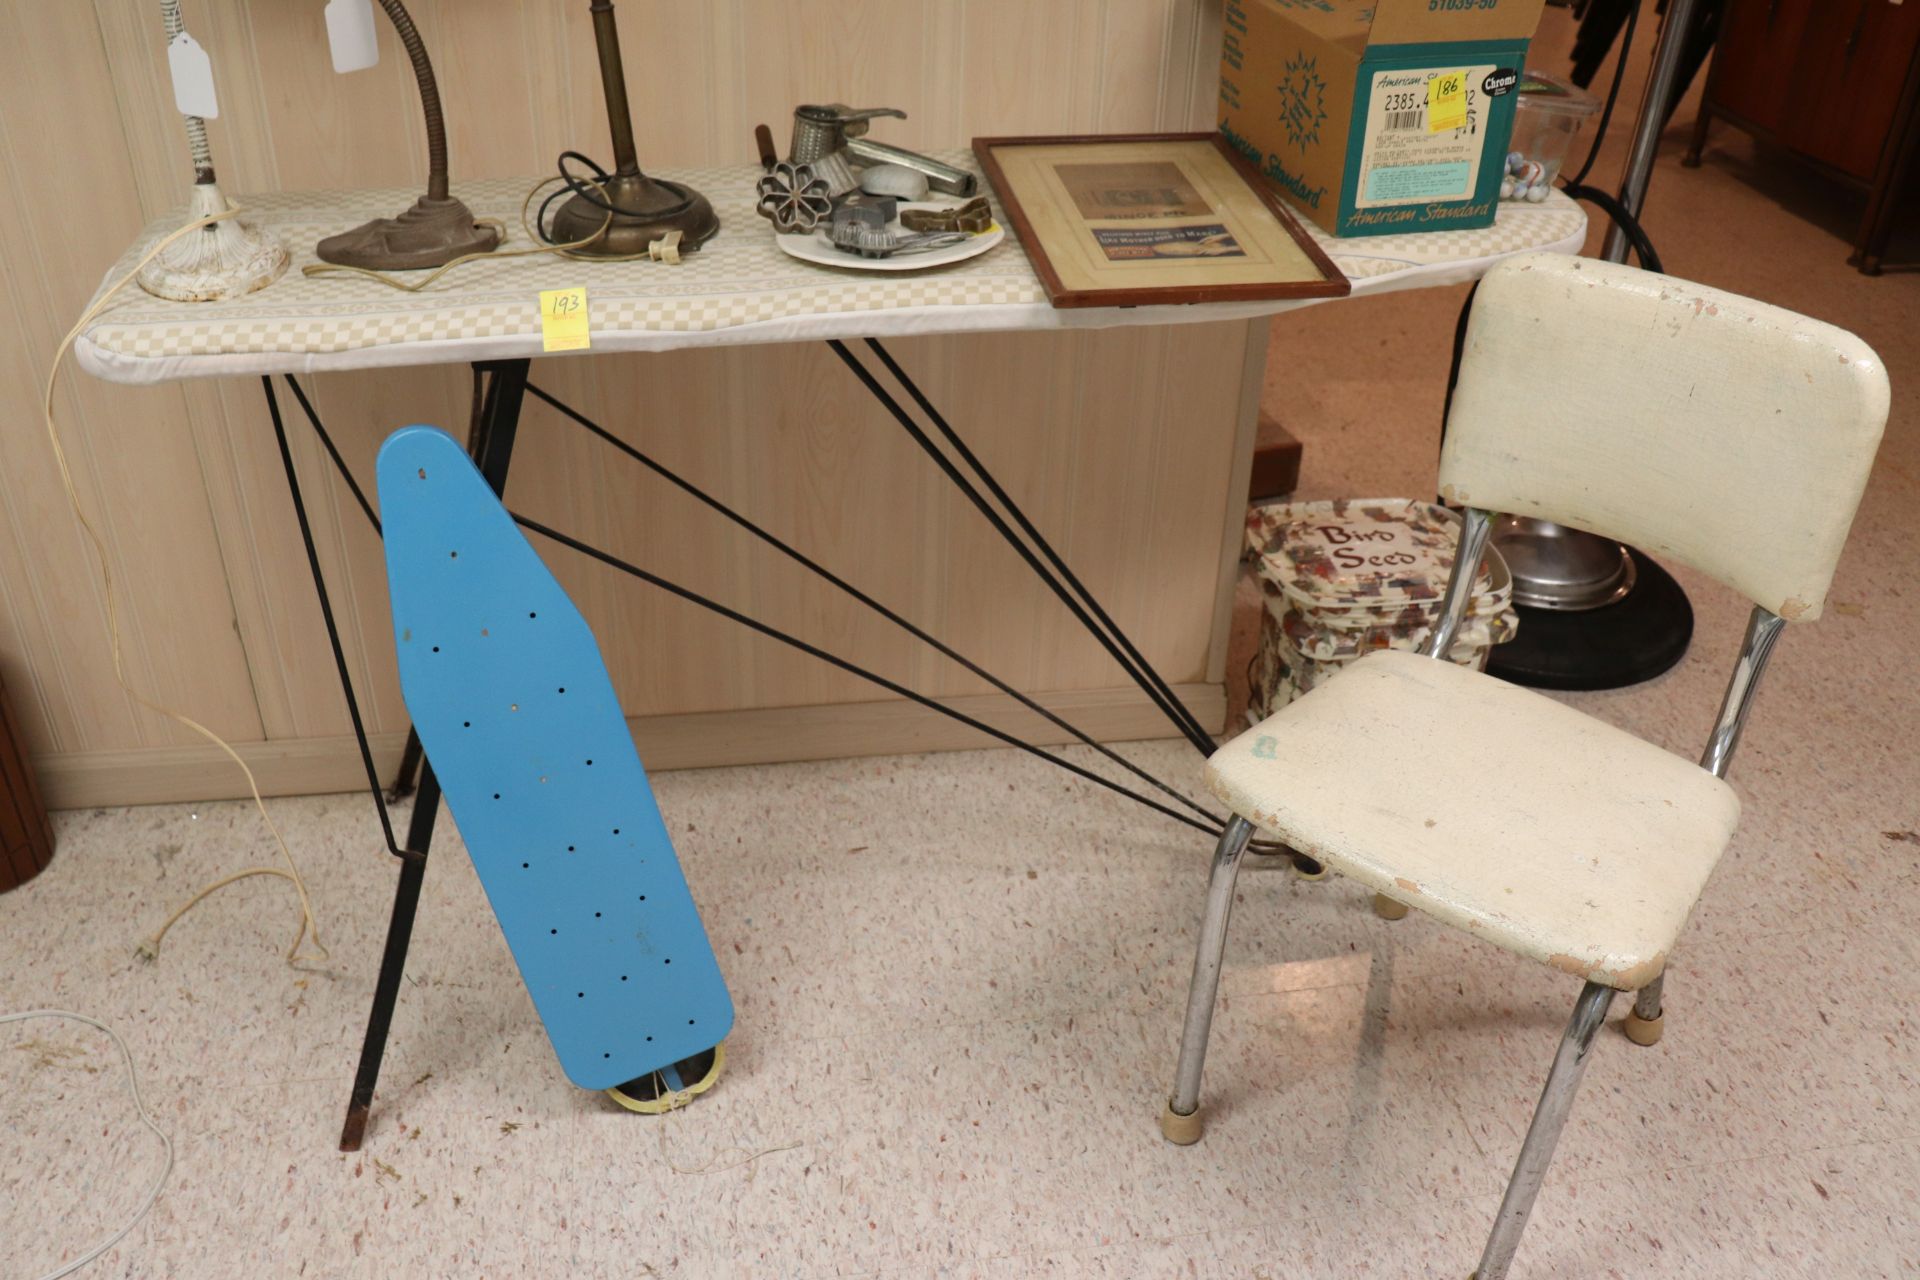 Group: two ironing boards and one chair